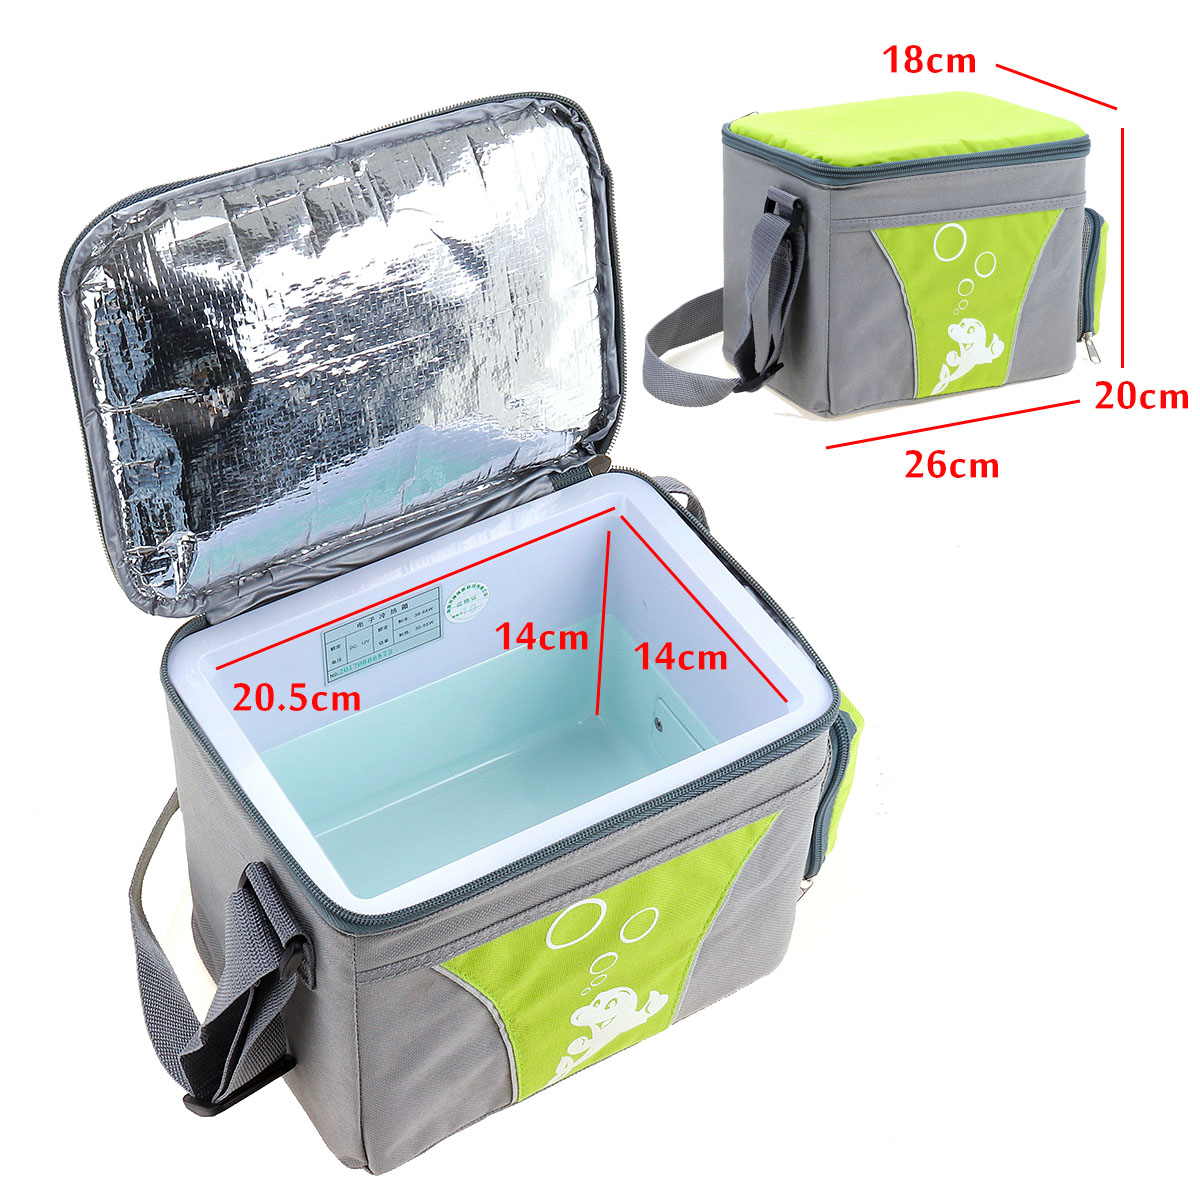 12V 6L Mini Car Refrigerator 2 In 1 Less Noise Car Cooling Heating Box Fridge for Cars Home Camping 14